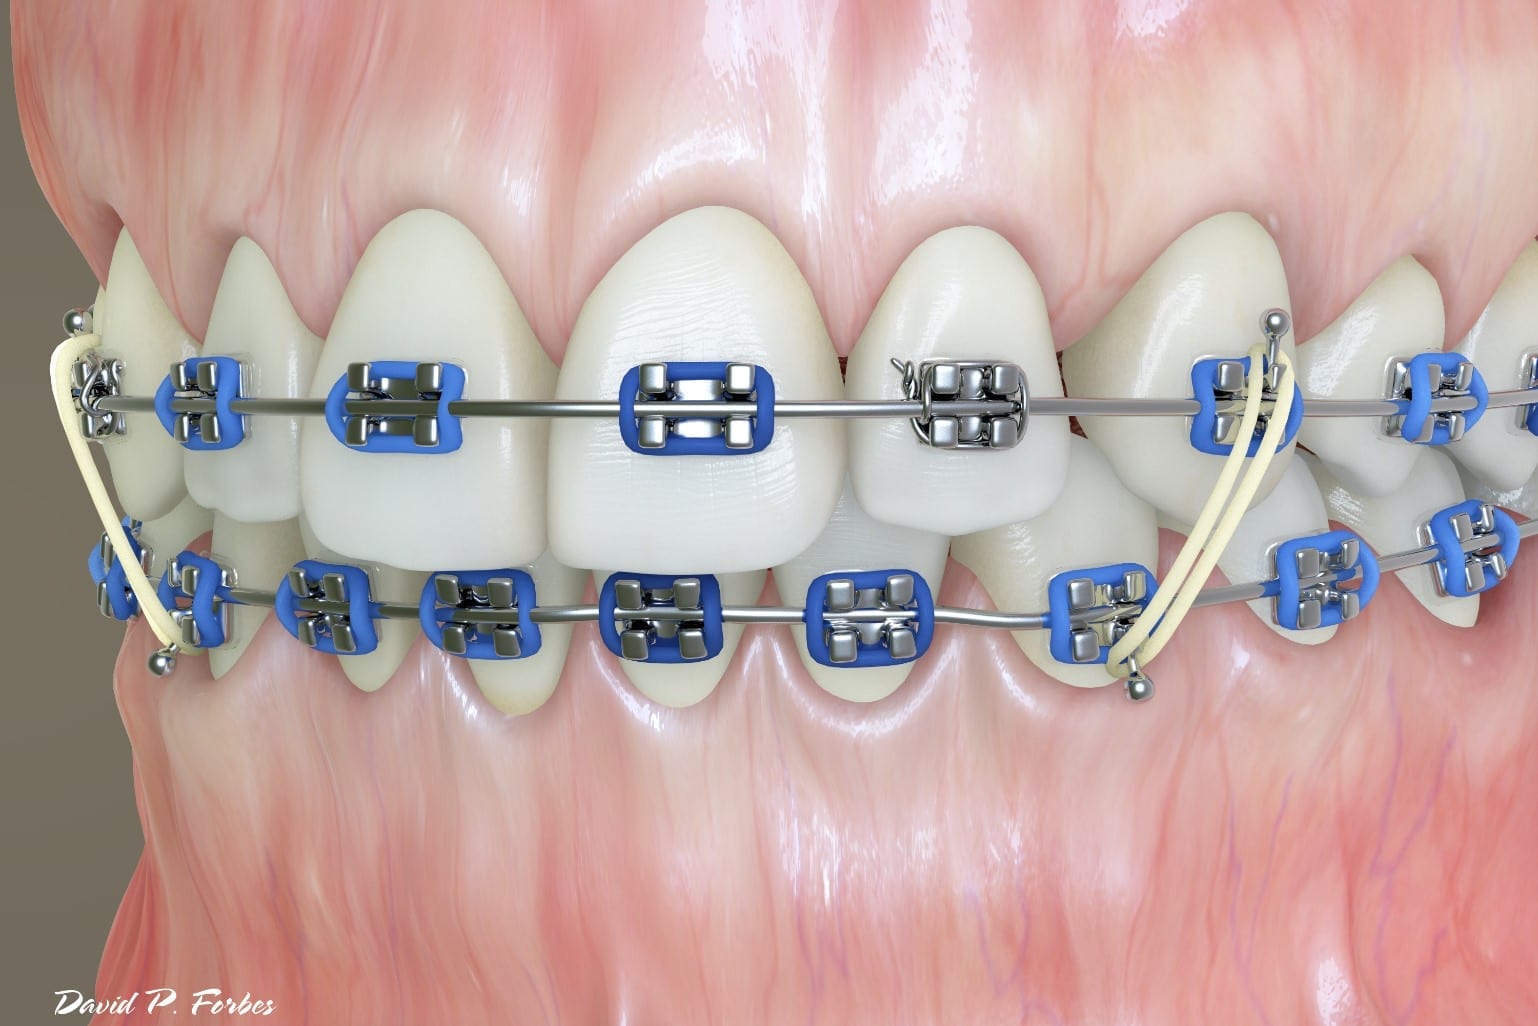 How elastics (rubber bands) SHOULD be used in orthodontics